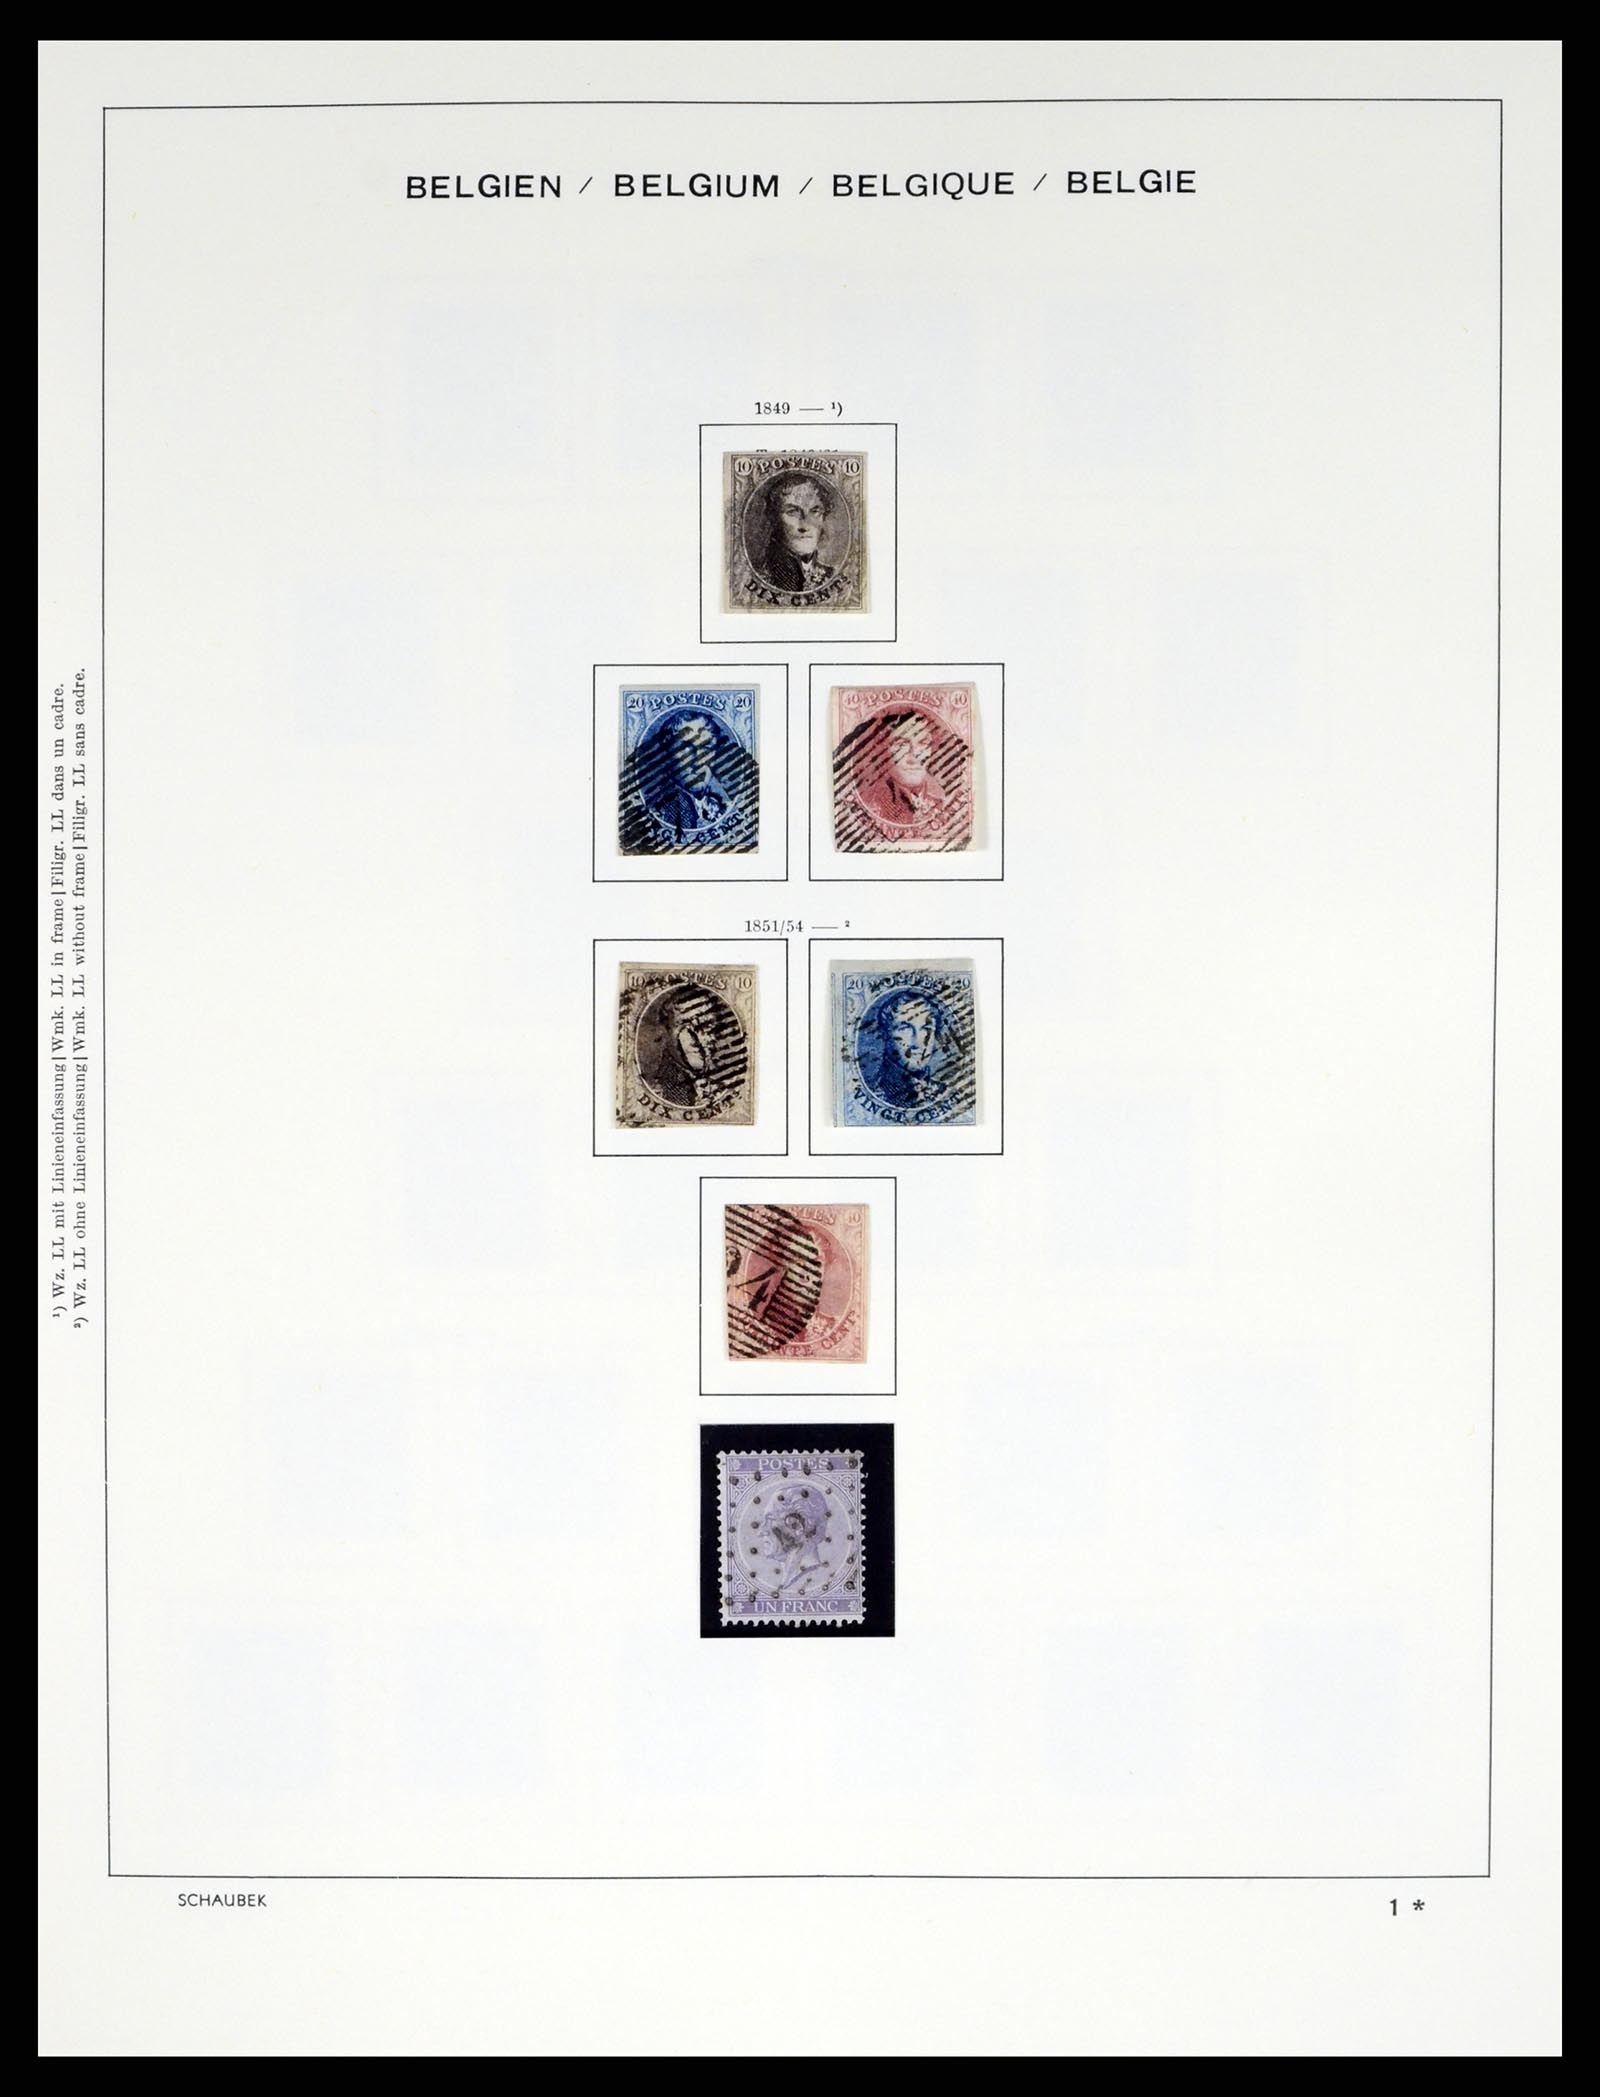 37595 002 - Stamp collection 37595 Super collection Belgium 1849-2015!